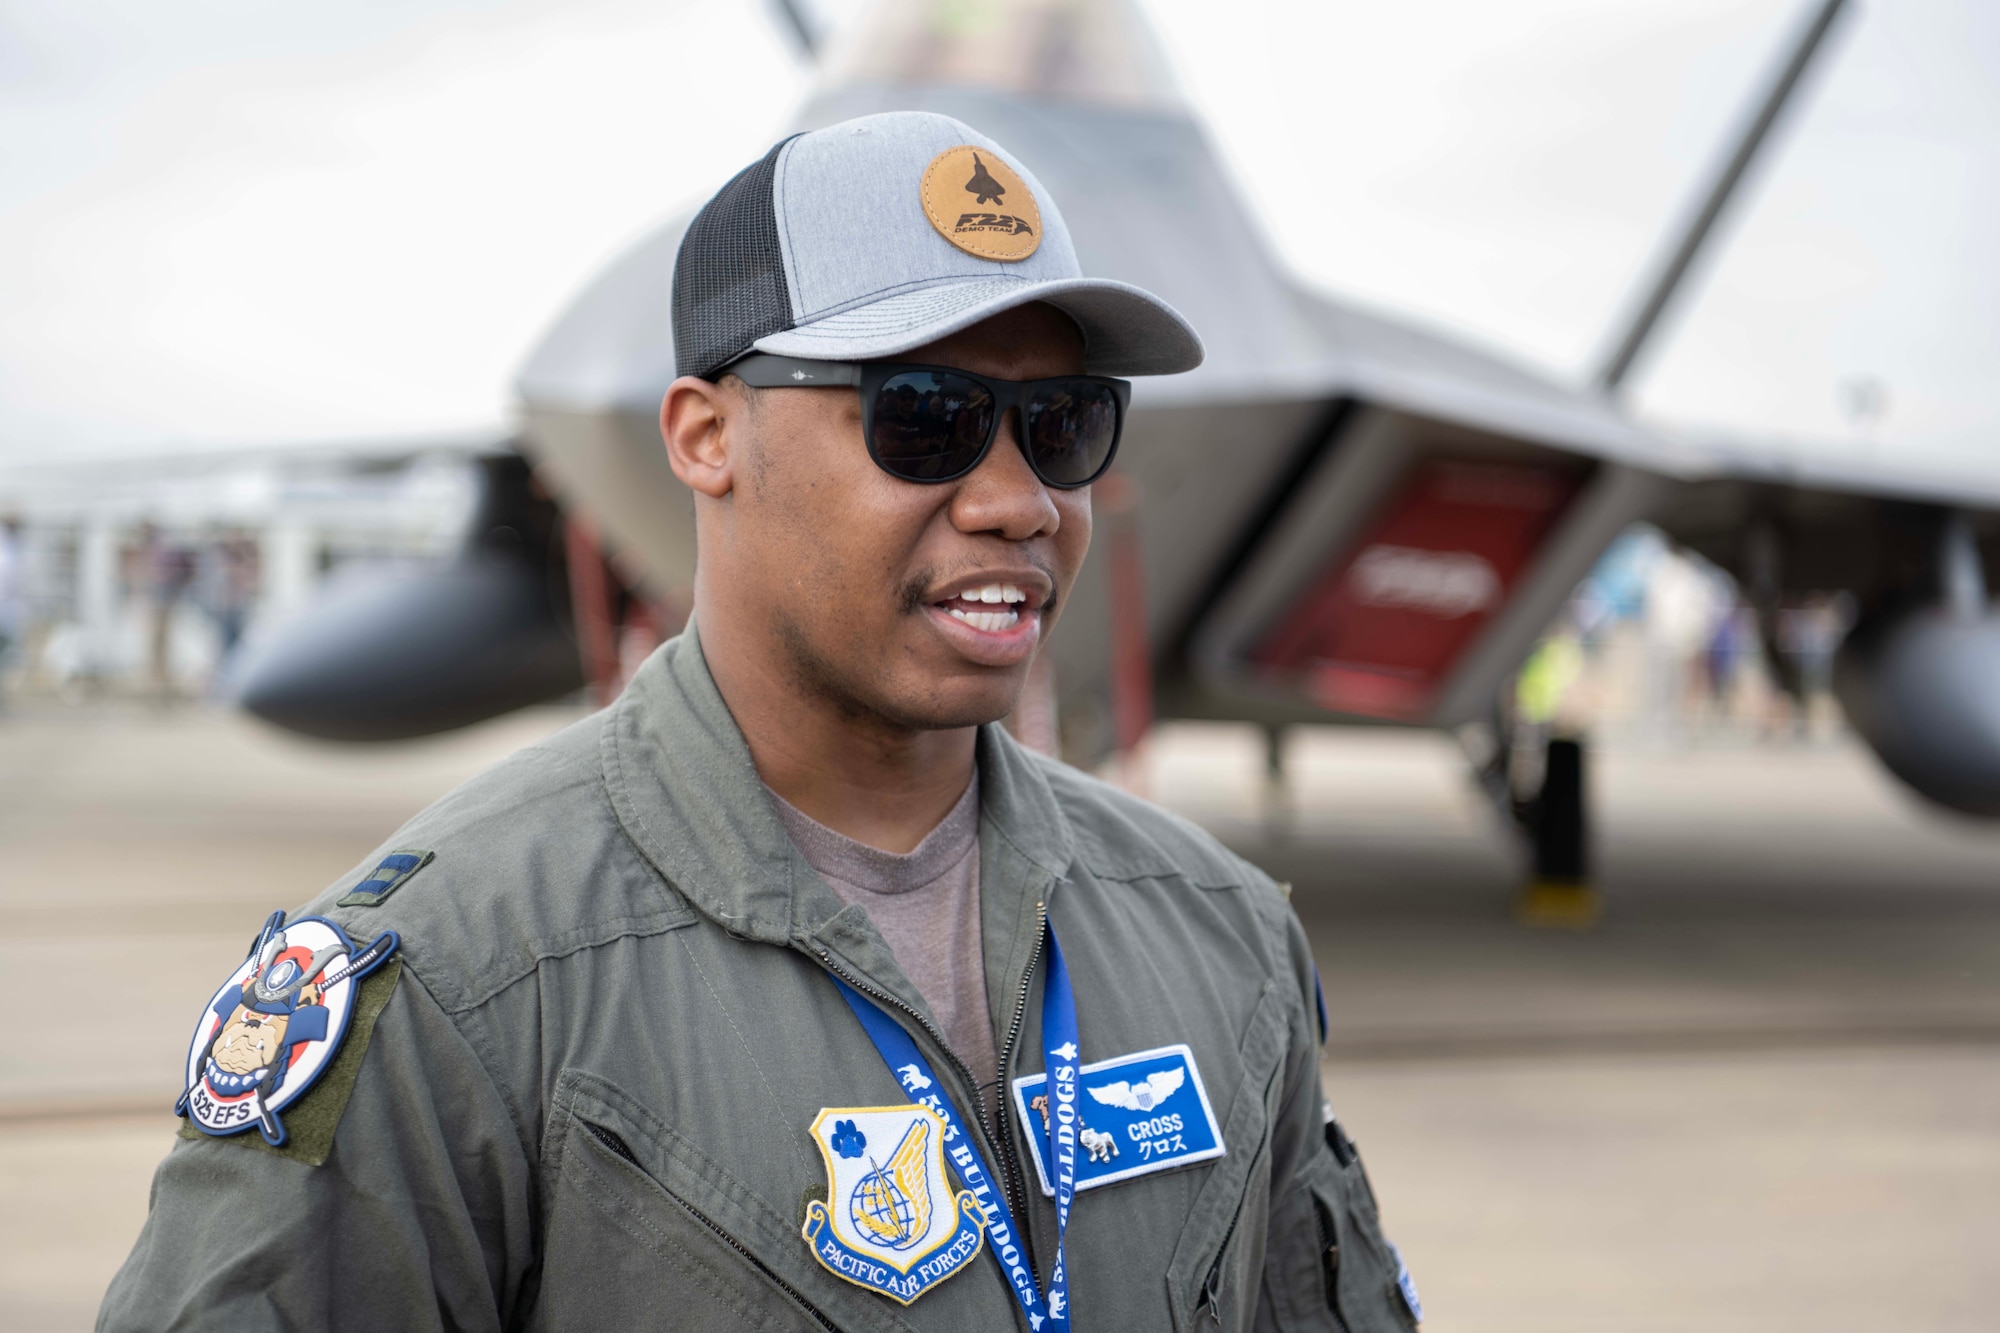 An Airman with a jet in the background